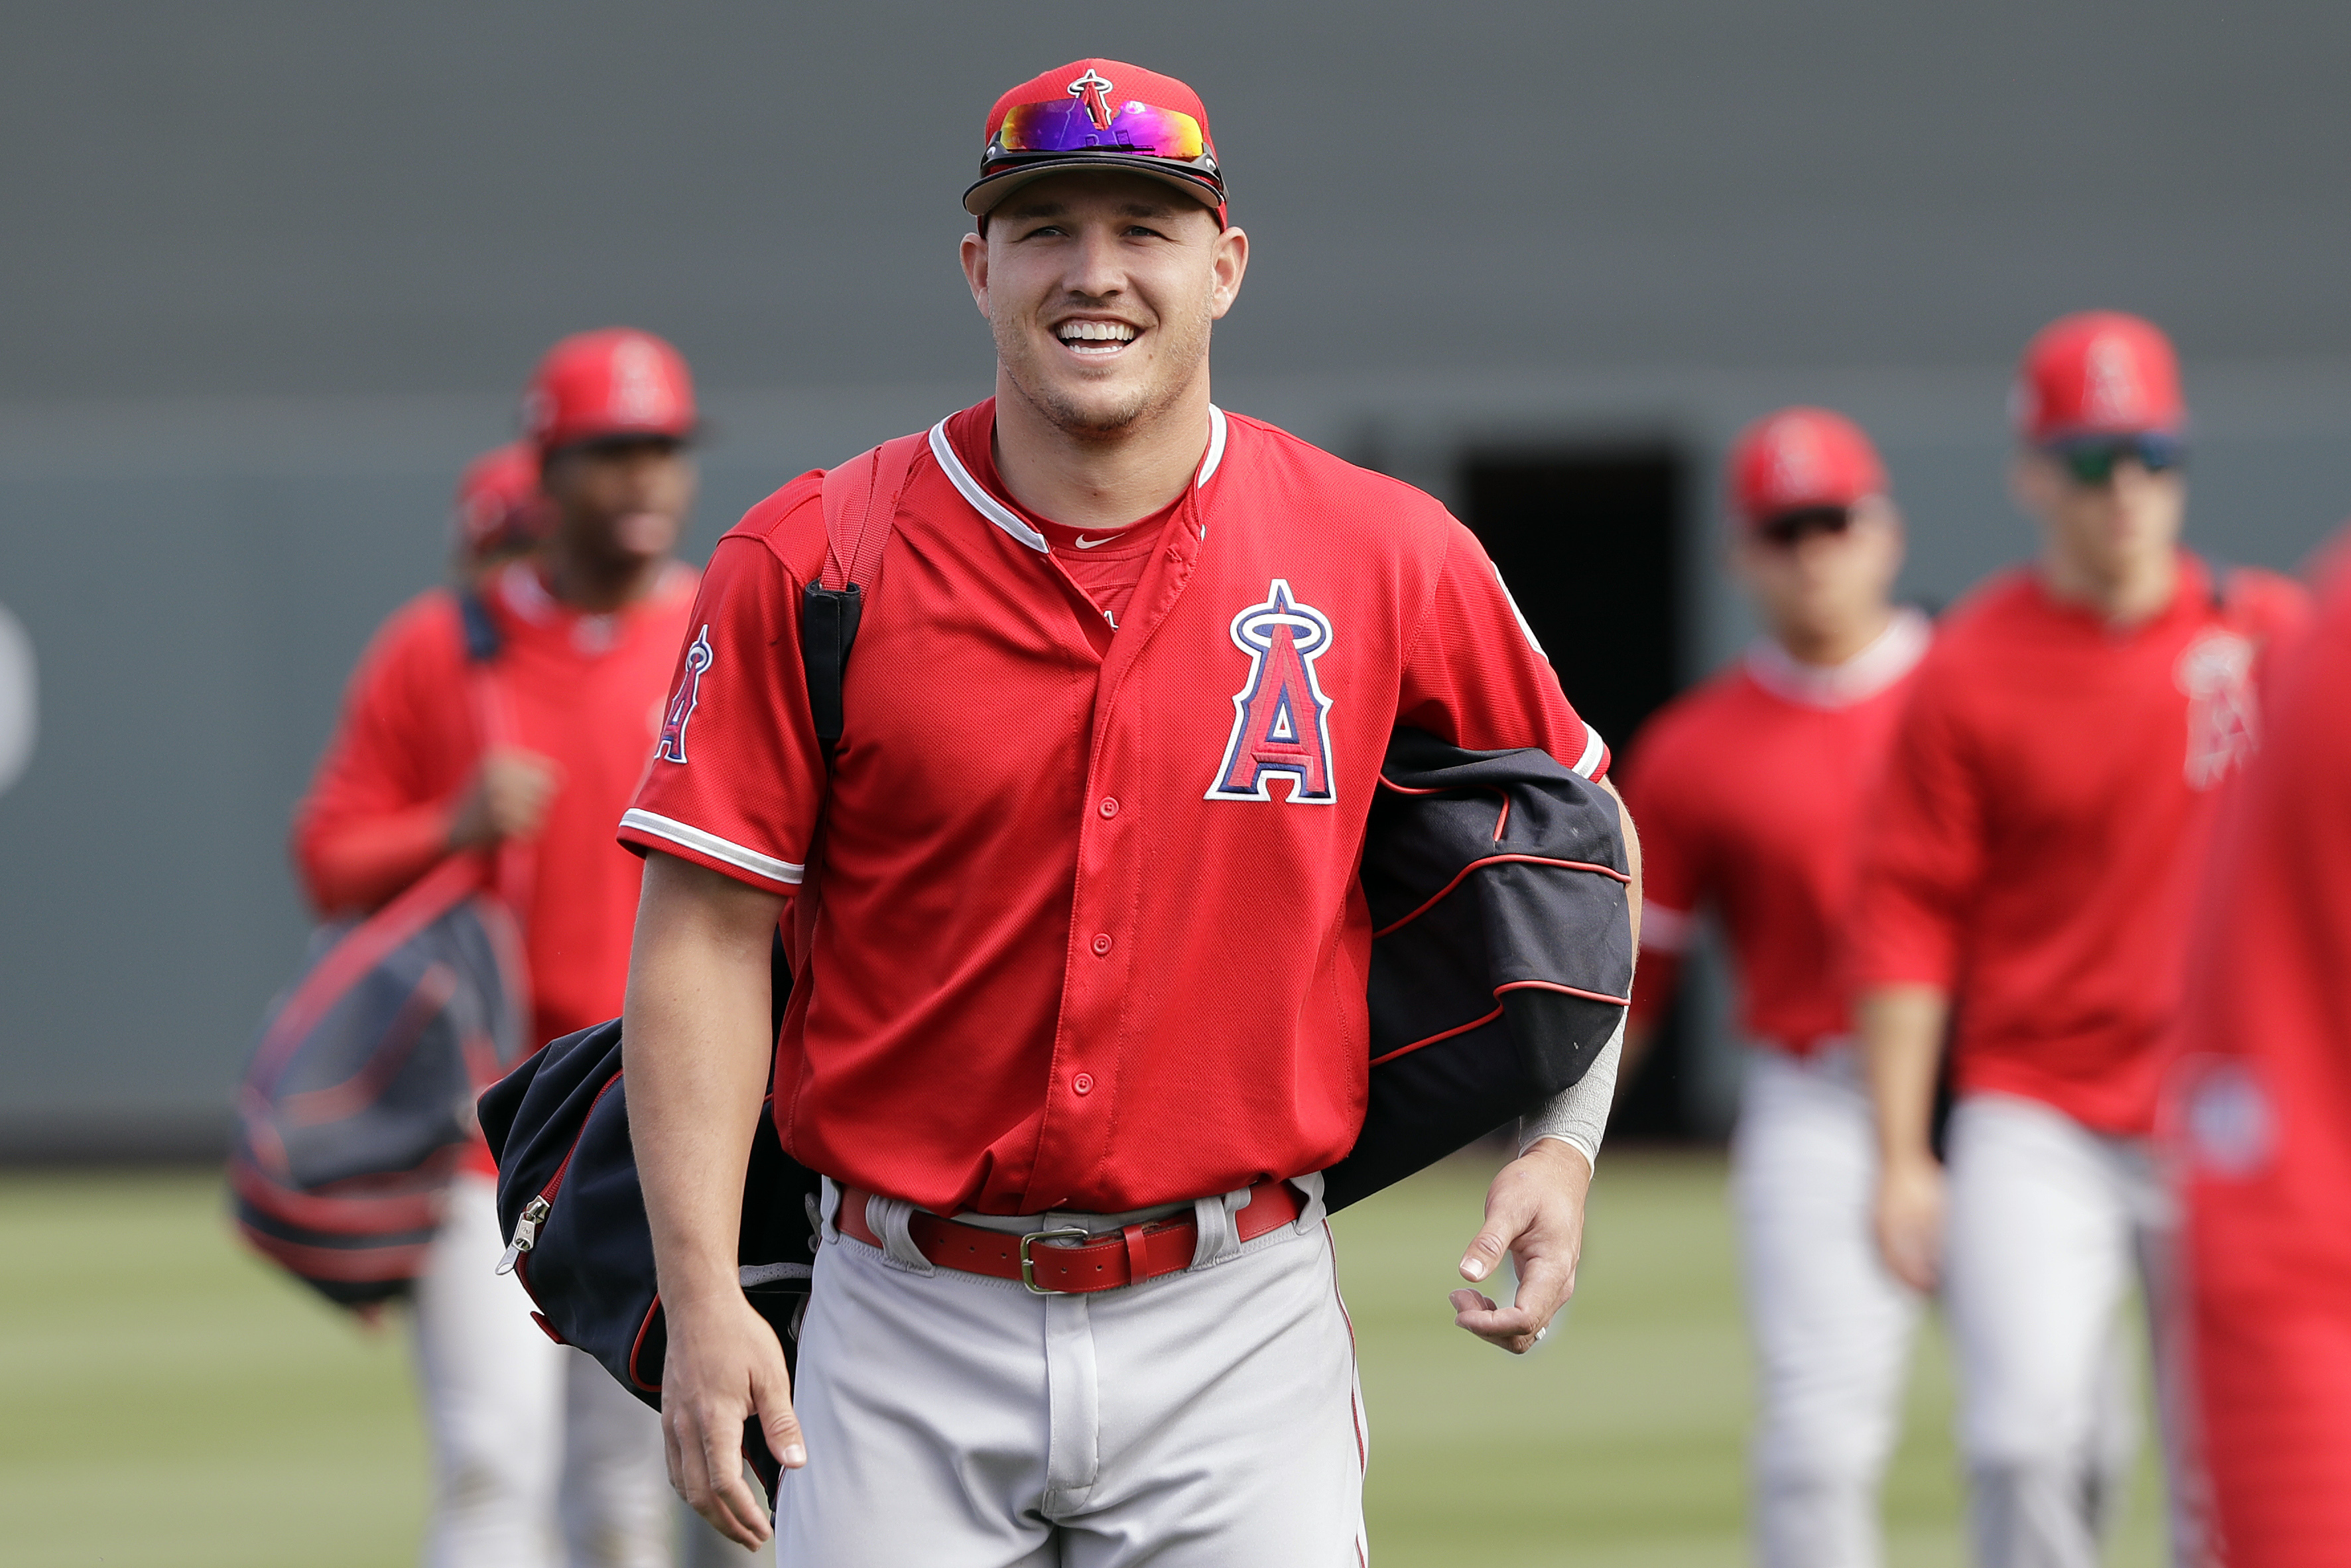 Trout, Angels finalize record $426.5 million, 12-year deal